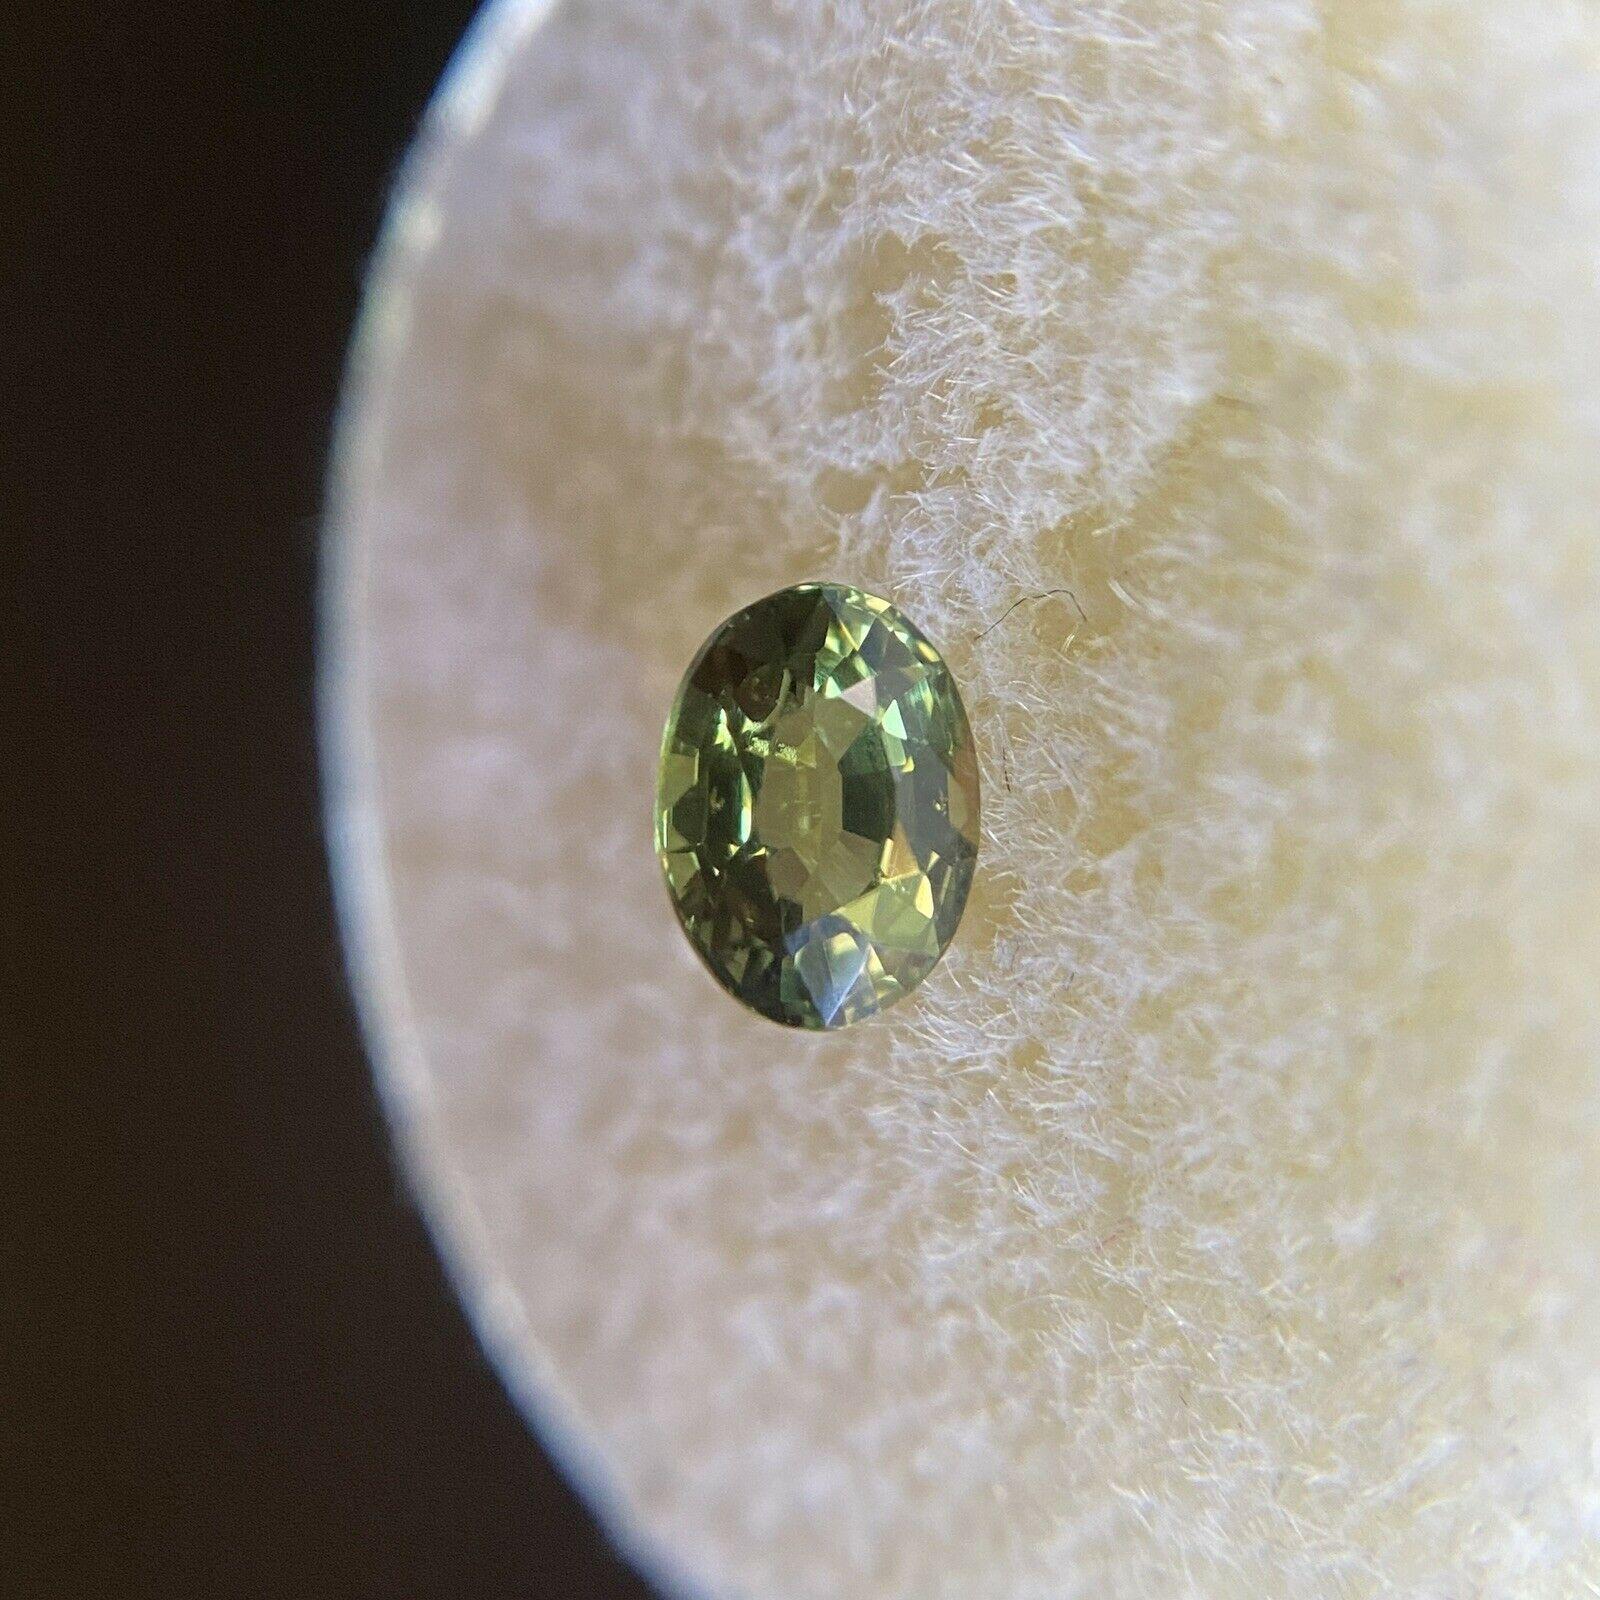 Fine Australian Vivid Green Yellow Untreated Sapphire 0.78ct Oval Cut Rare Gem

Natural Untreated Yellow Green Australian Sapphire Gemstone. 
0.78 Carat with a beautiful vivid yellow green colour. Also has excellent clarity, a very clean stone with